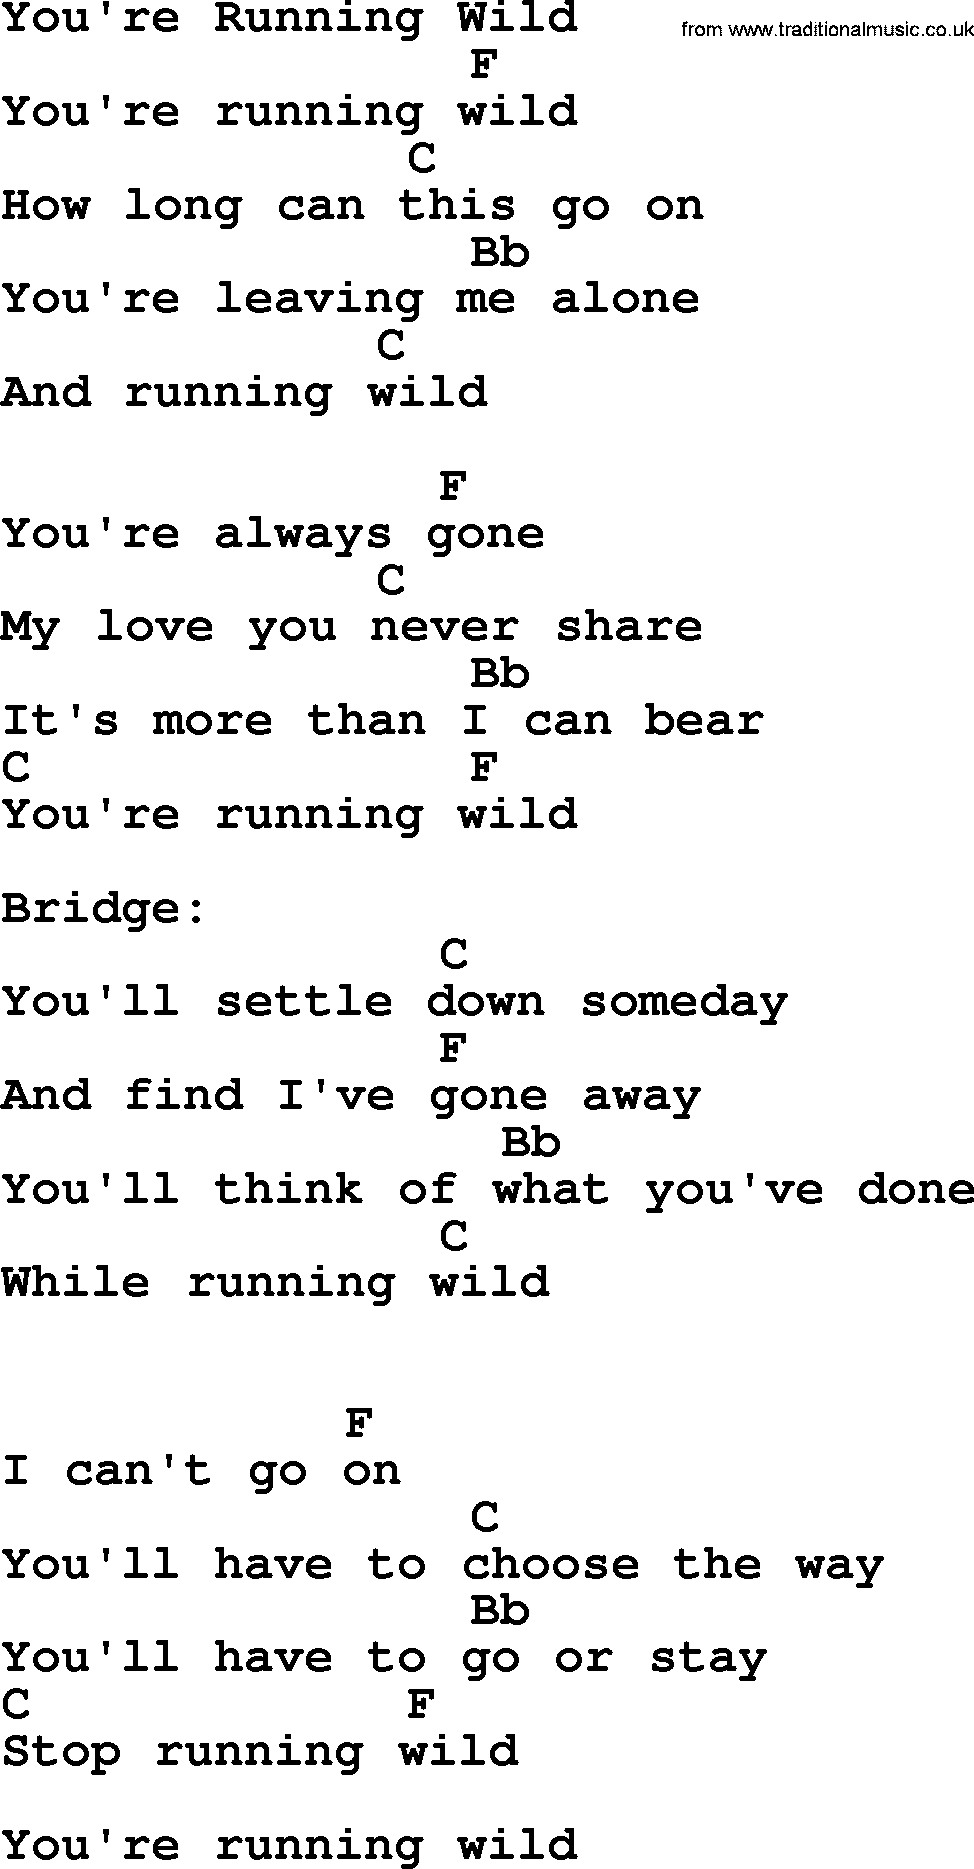 Bluegrass song: You're Running Wild, lyrics and chords